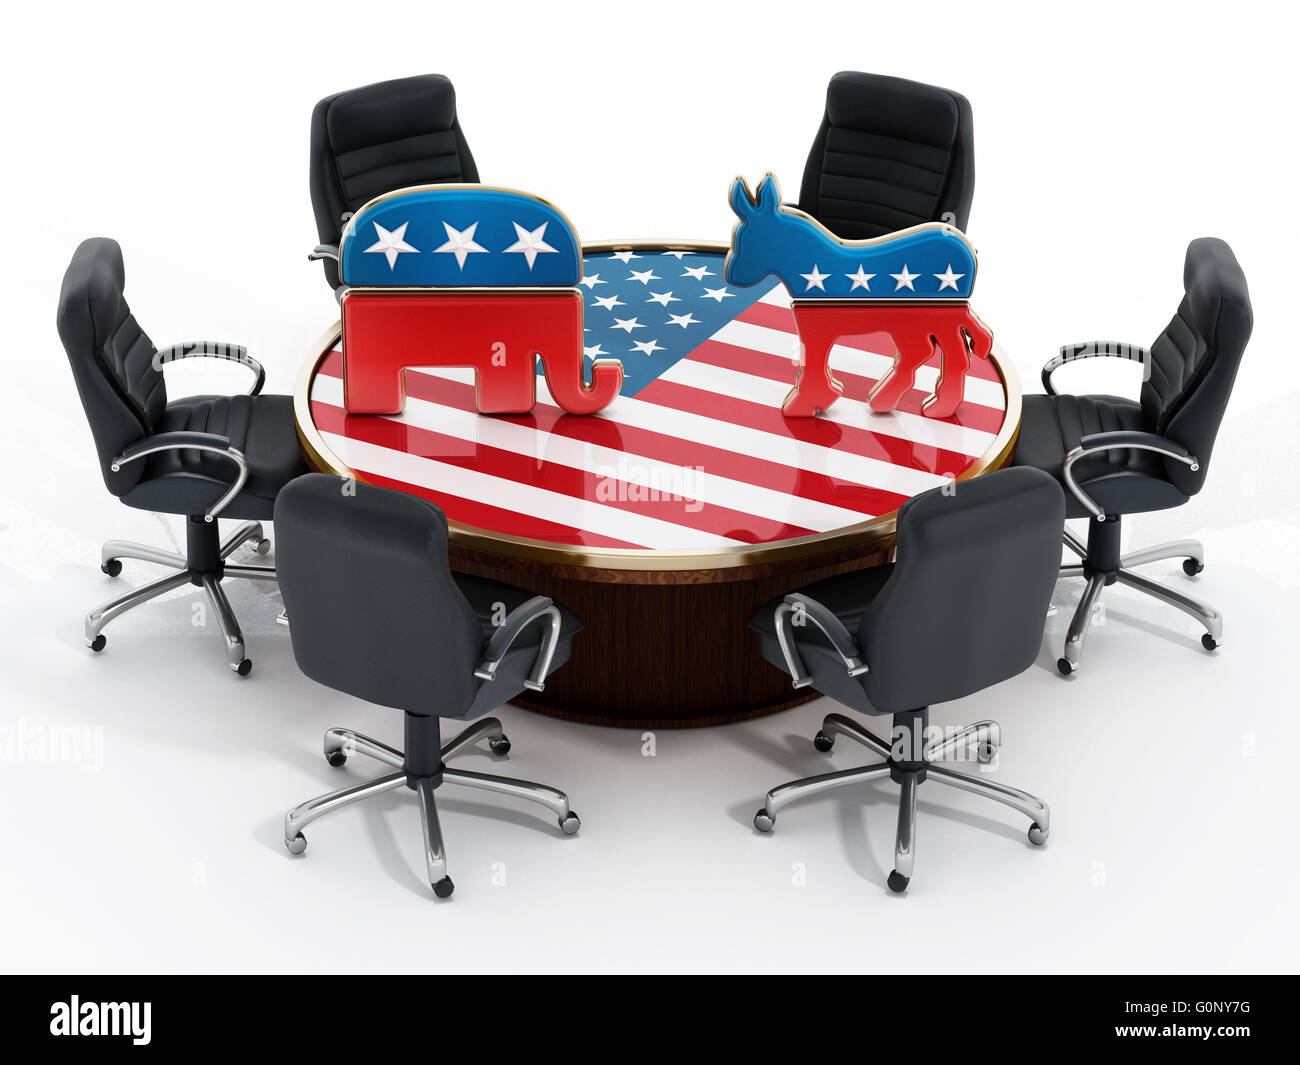 USA Political party symbols standing on American flag covered table. Stock Photo